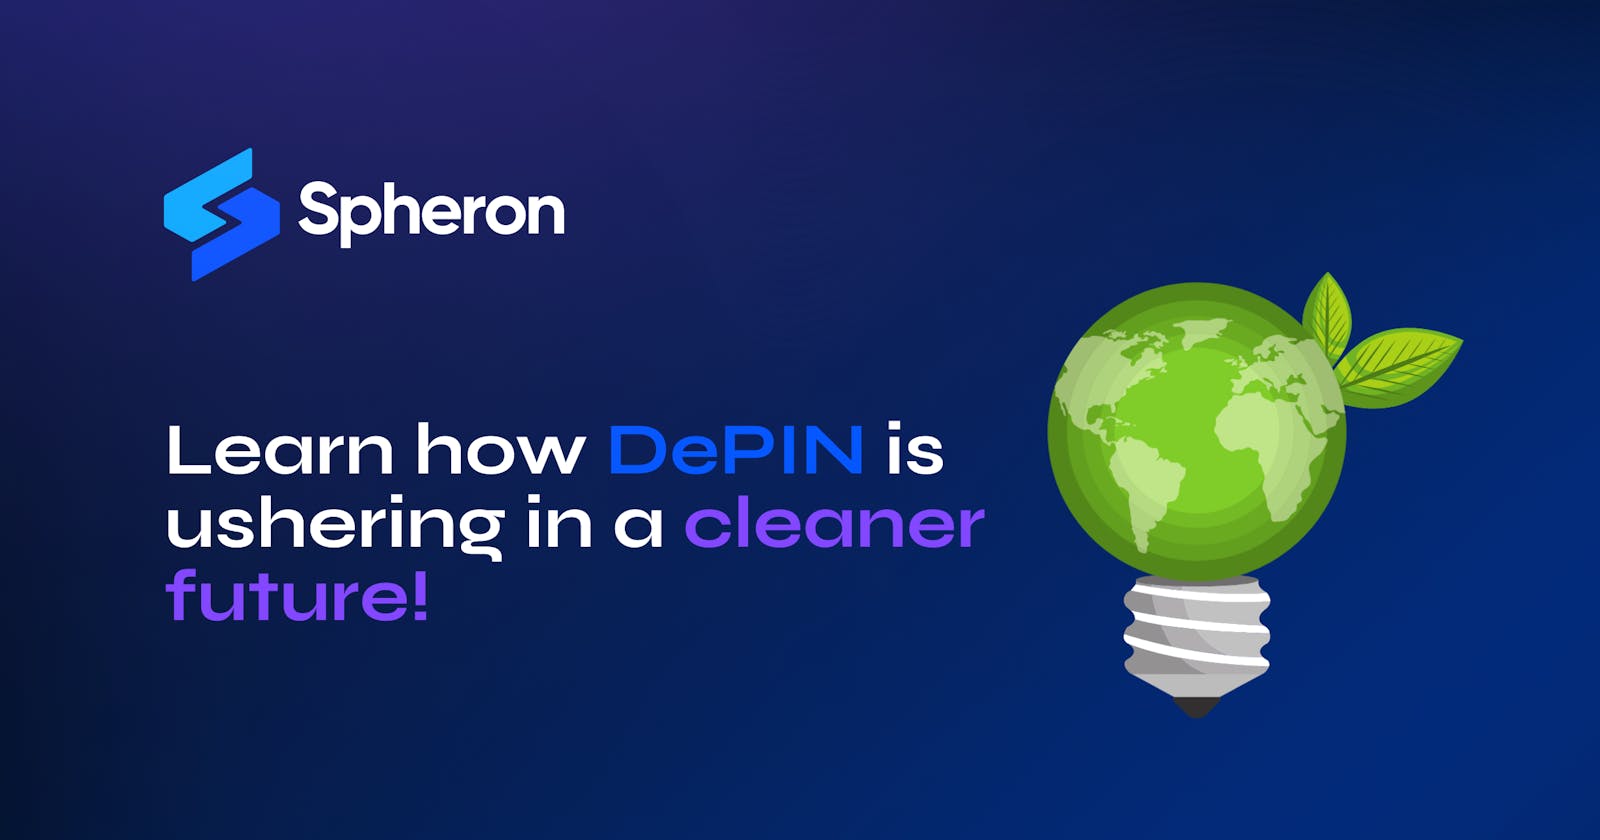 Learn how DePIN is ushering in a cleaner future